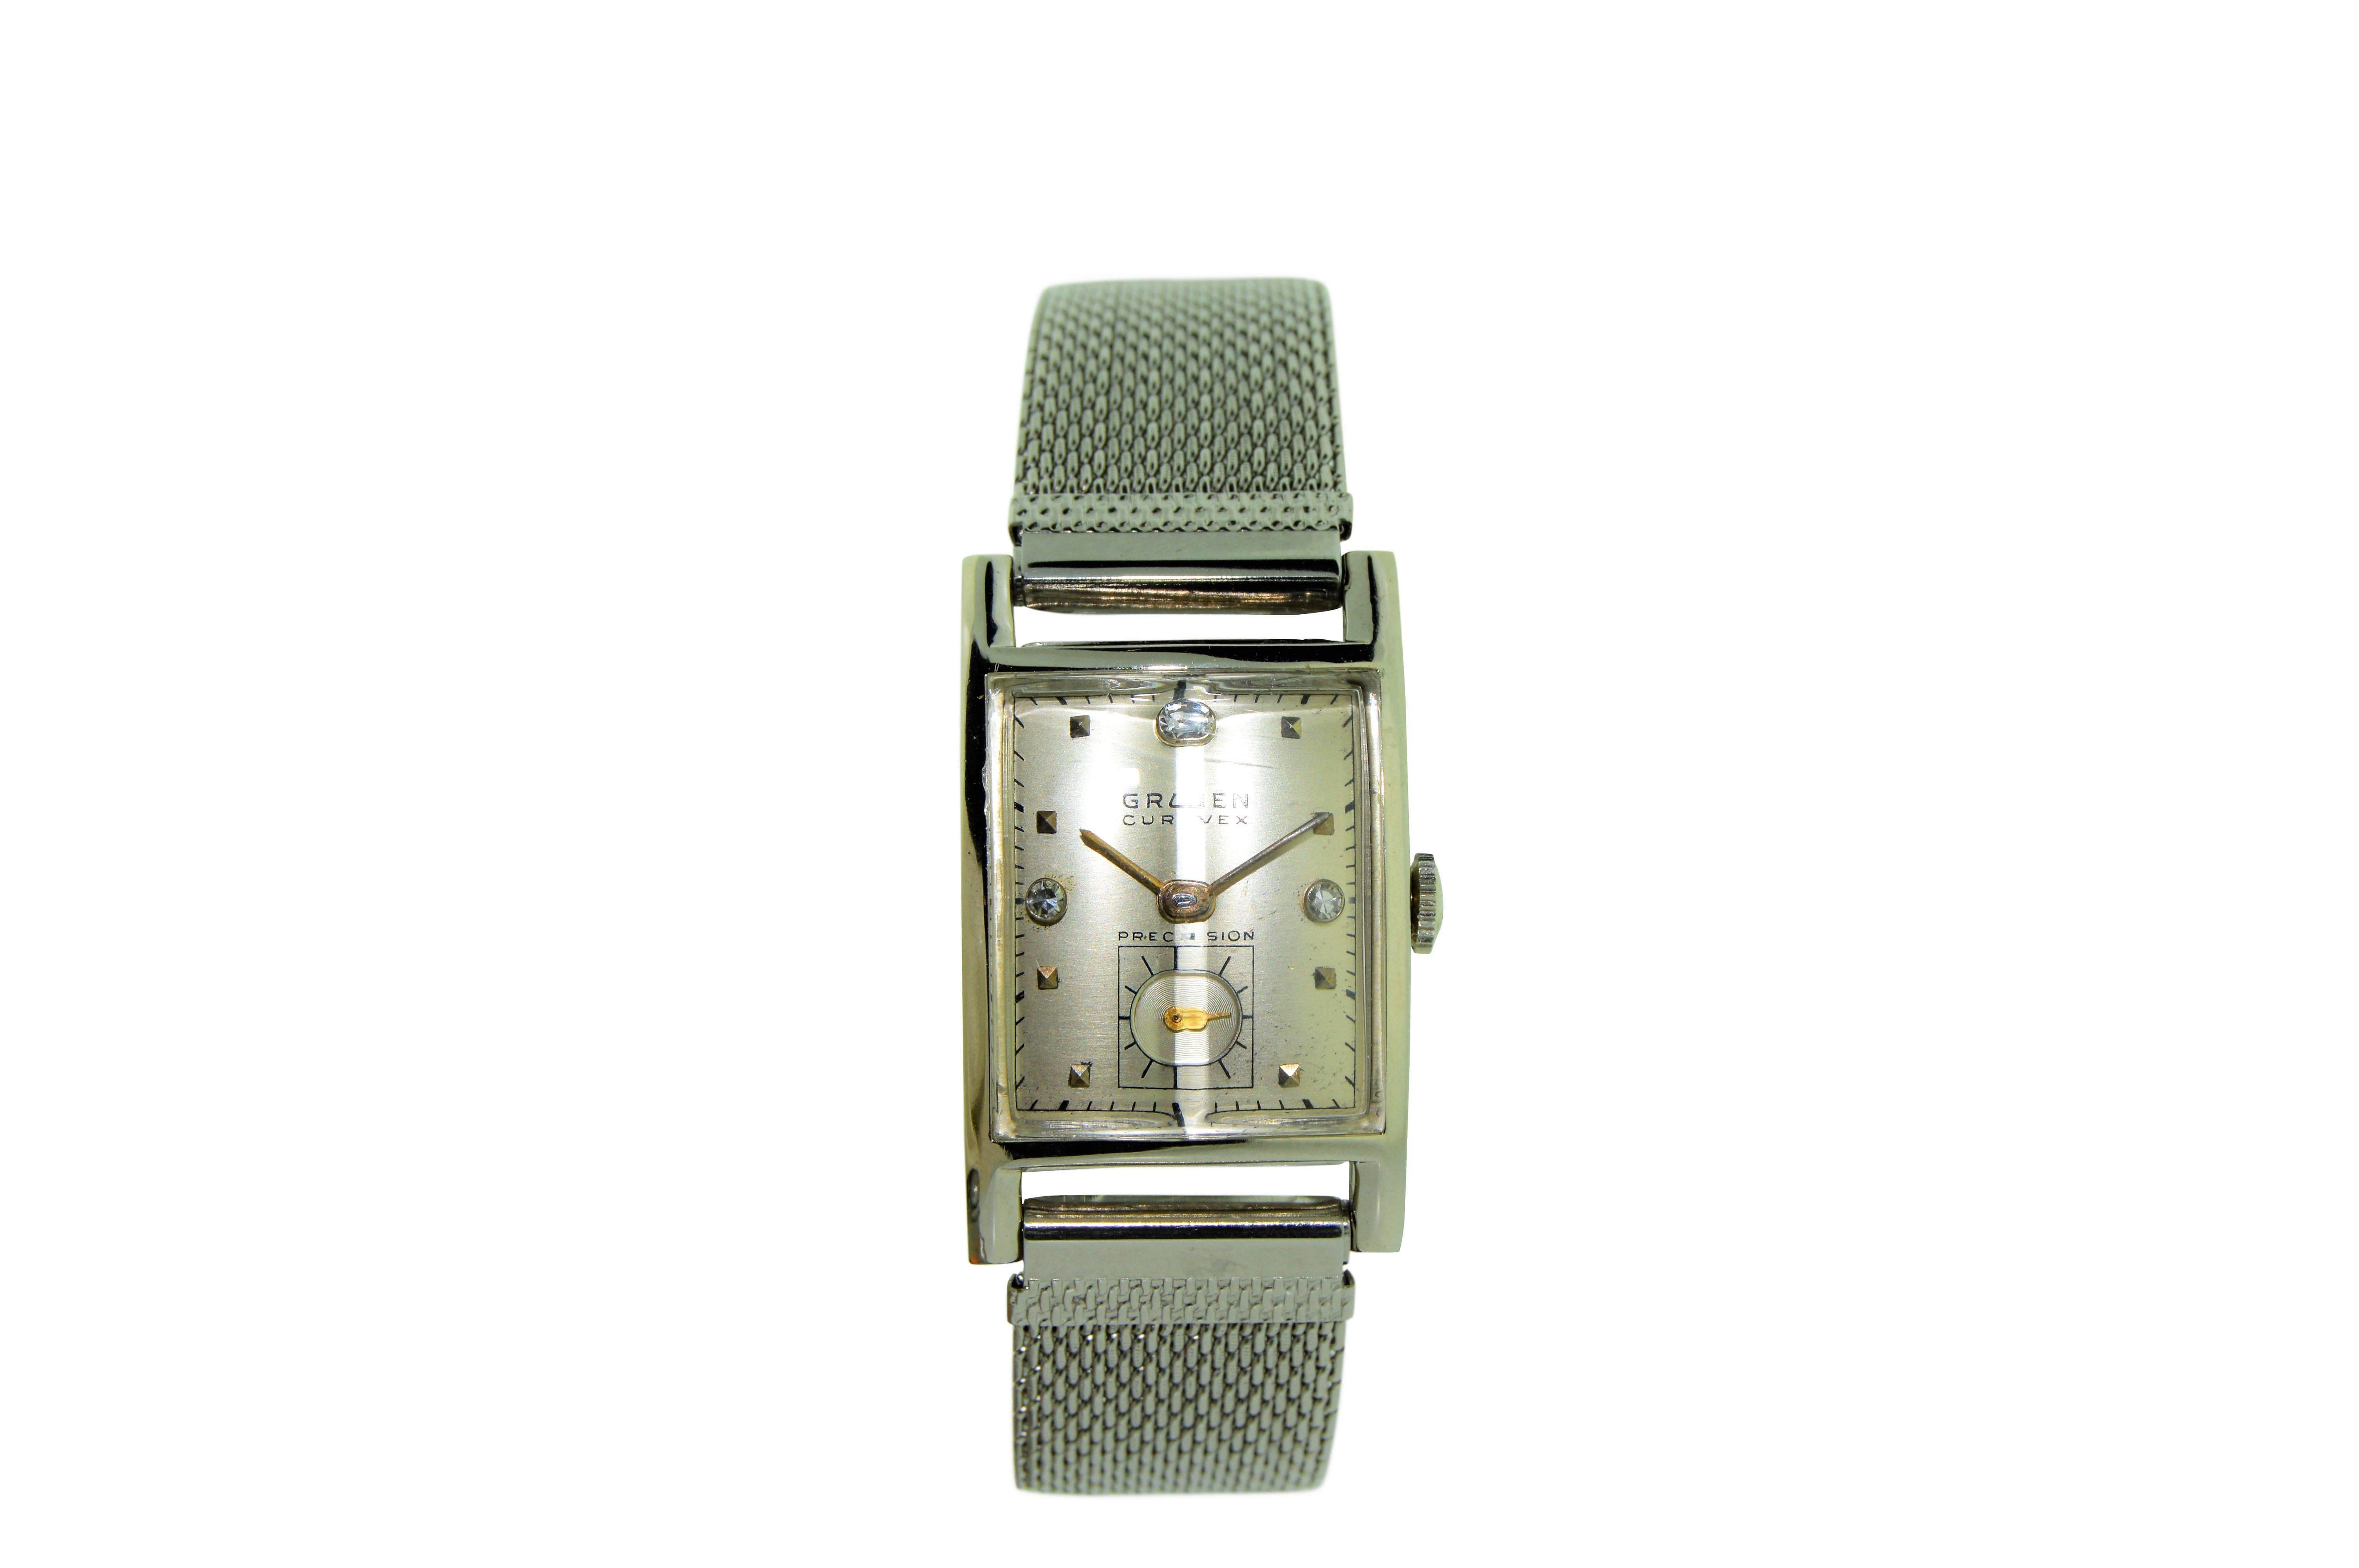 FACTORY / HOUSE: Gruen Watch Company
STYLE / REFERENCE: Dress / Art Deco
METAL / MATERIAL: 14Kt. Solid White Gold / Matching Color Stainless Steel Bracelet
DIMENSIONS:  35mm  X  32mm
CIRCA: 1940's 
MOVEMENT / CALIBER: Manual Winding 17 Jewels / Cal.